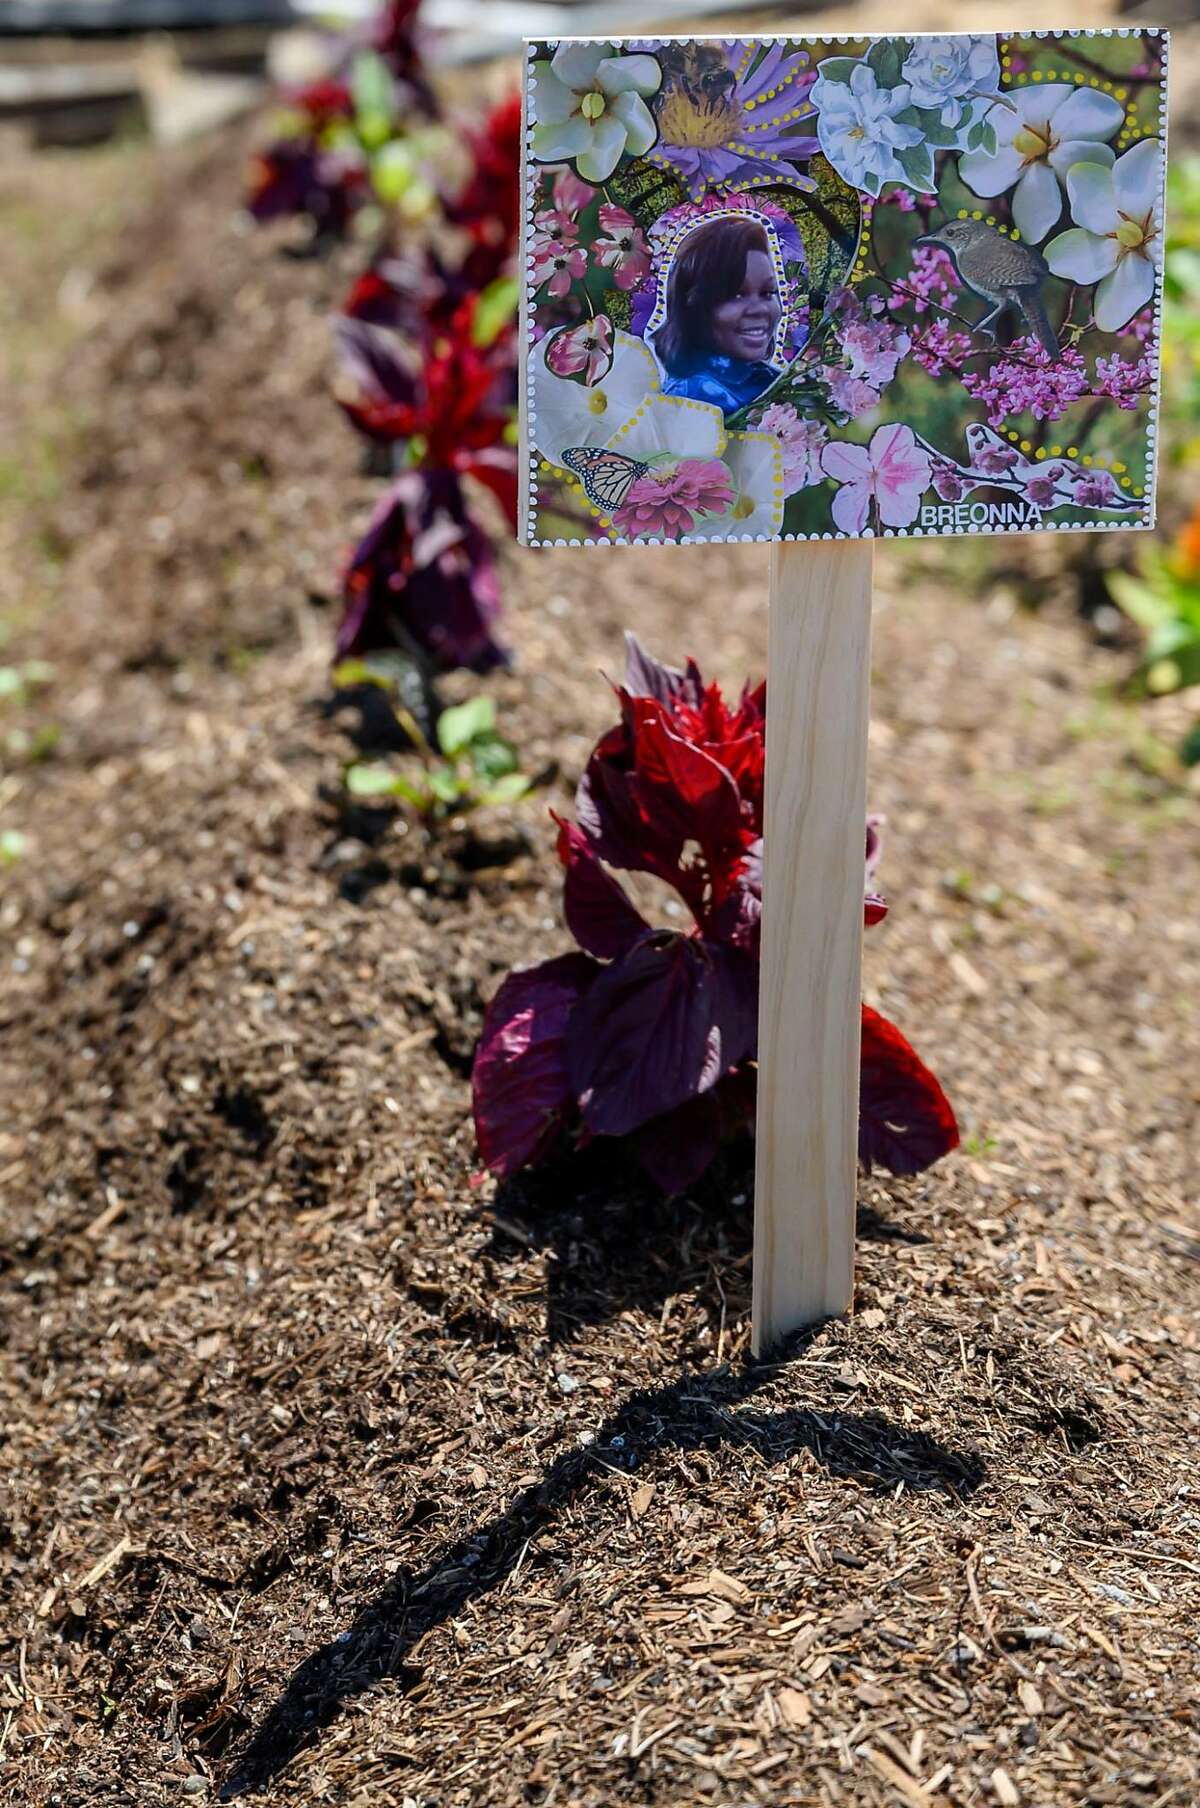 A row marker made by Danielle Fernandez bears a photo of Breonna Taylor, a Louisville woman who was killed by police officers during a no-knock-warrant in March, is illuminated by the sun on Friday, July 17, 2020 at Loyal to the Soil urban garden in San Francisco, Calif.